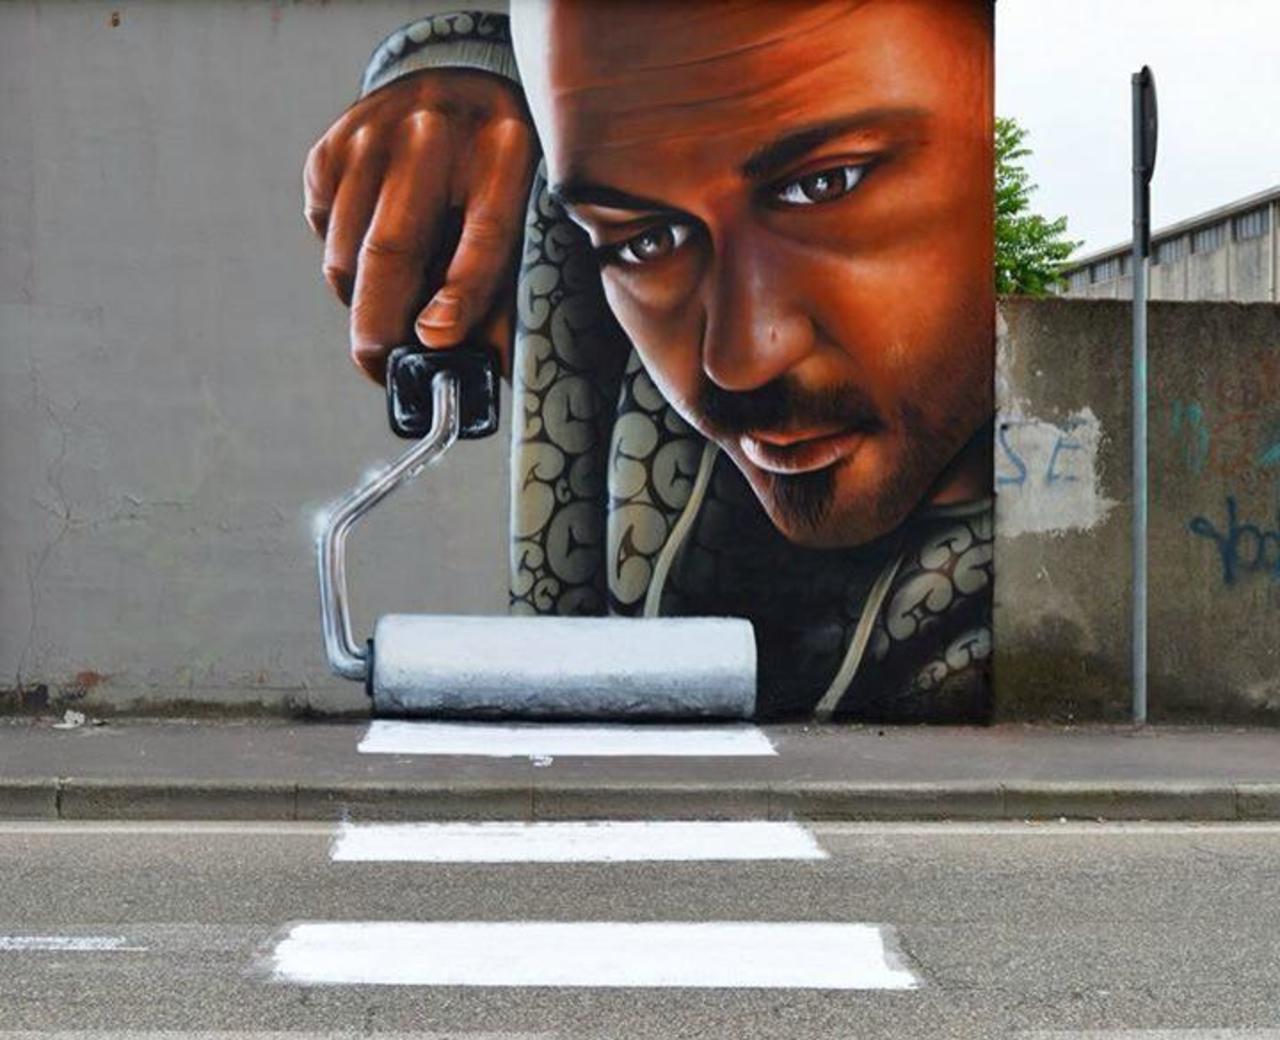 Great placement in this clever Street Art piece by Cheone in Italy 

#art #arte #graffiti #streetart http://t.co/iPsYcp5ysr